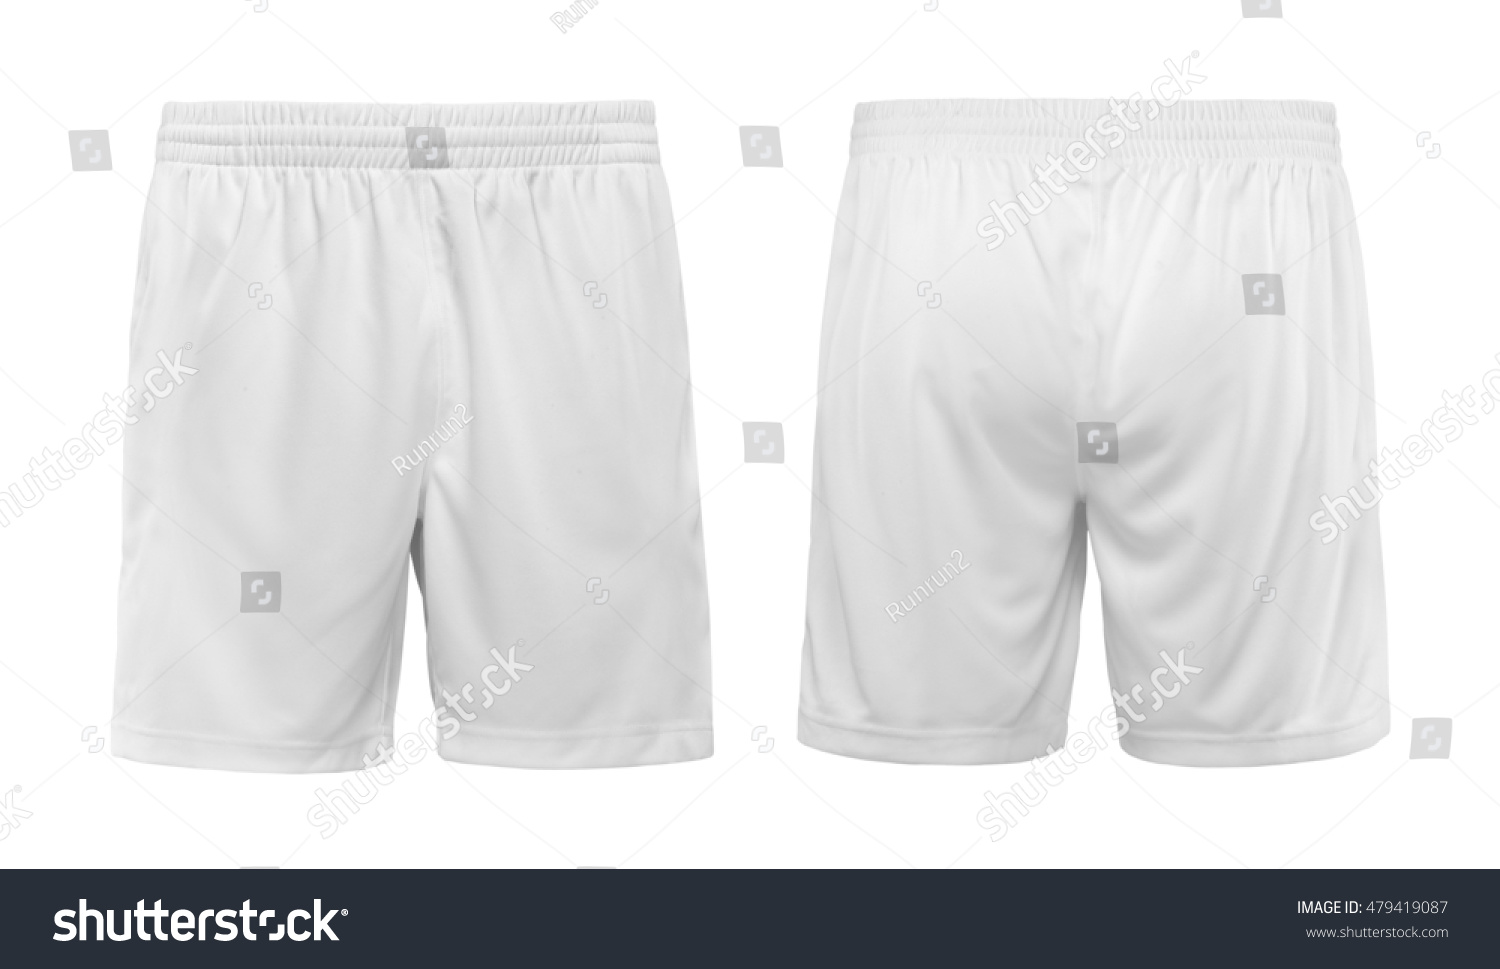 758 Soccer pants Stock Photos, Images & Photography | Shutterstock